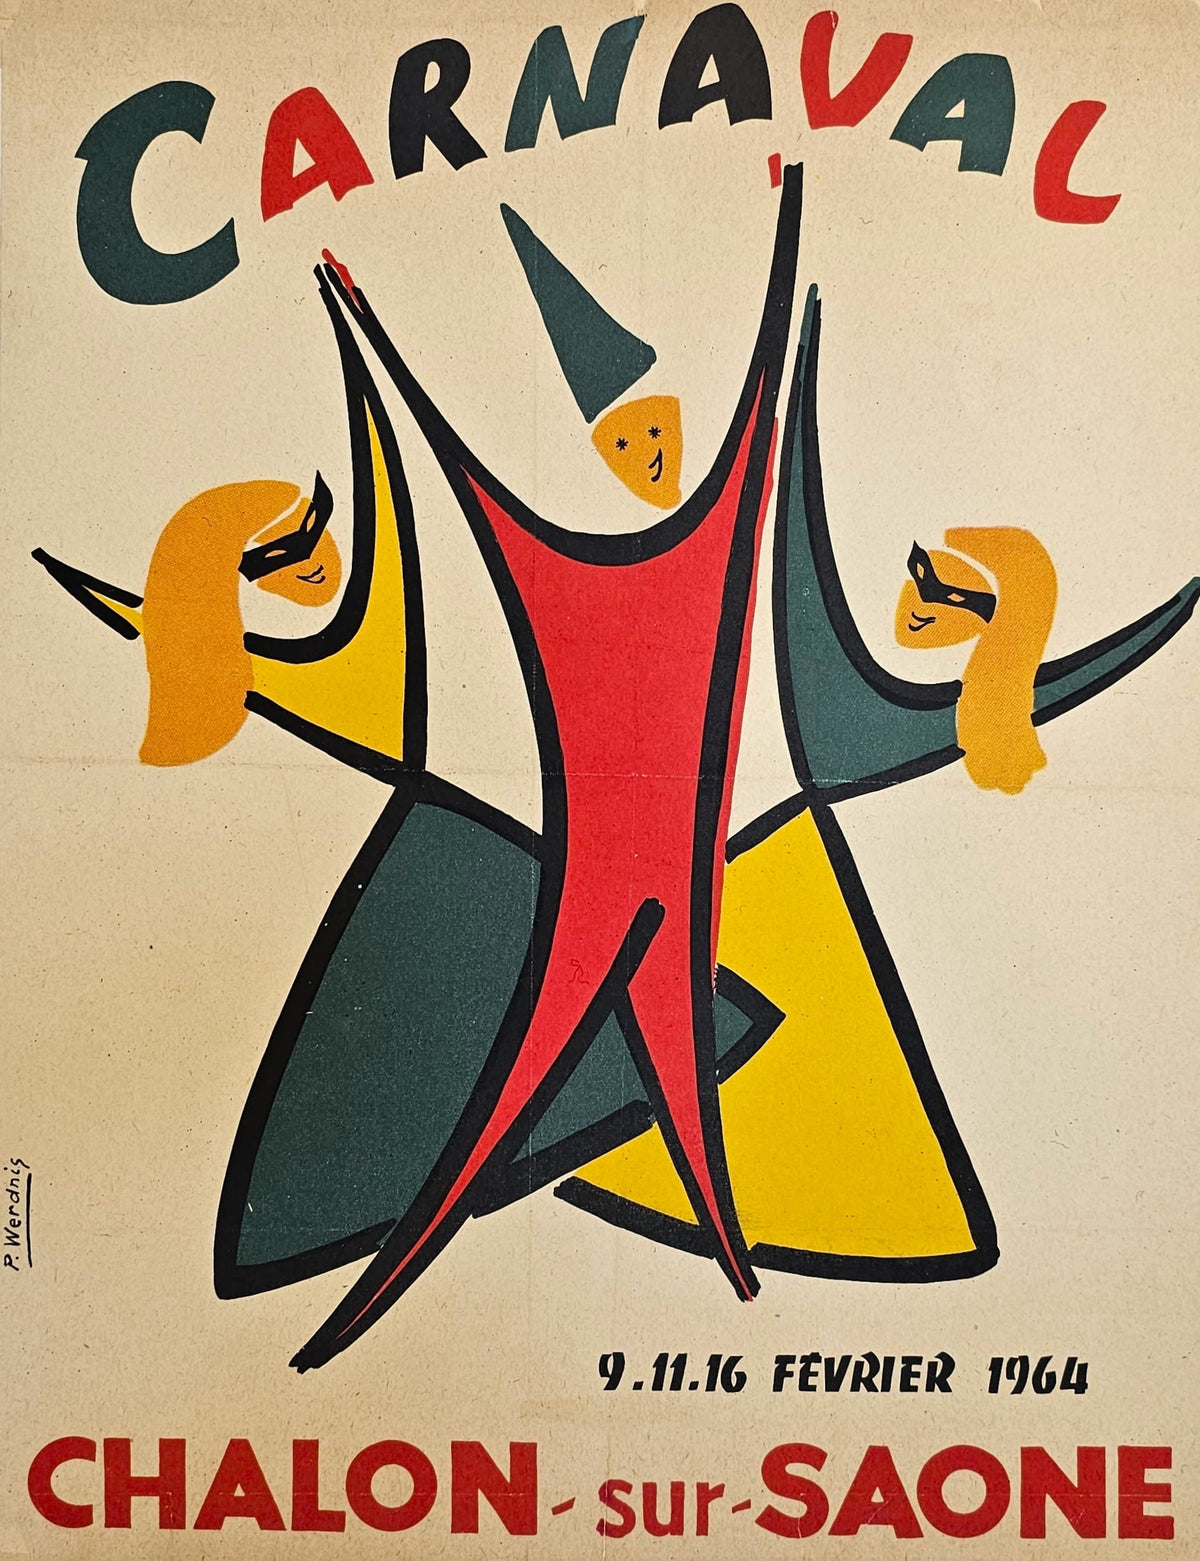 Carnaval - Authentic Vintage Poster